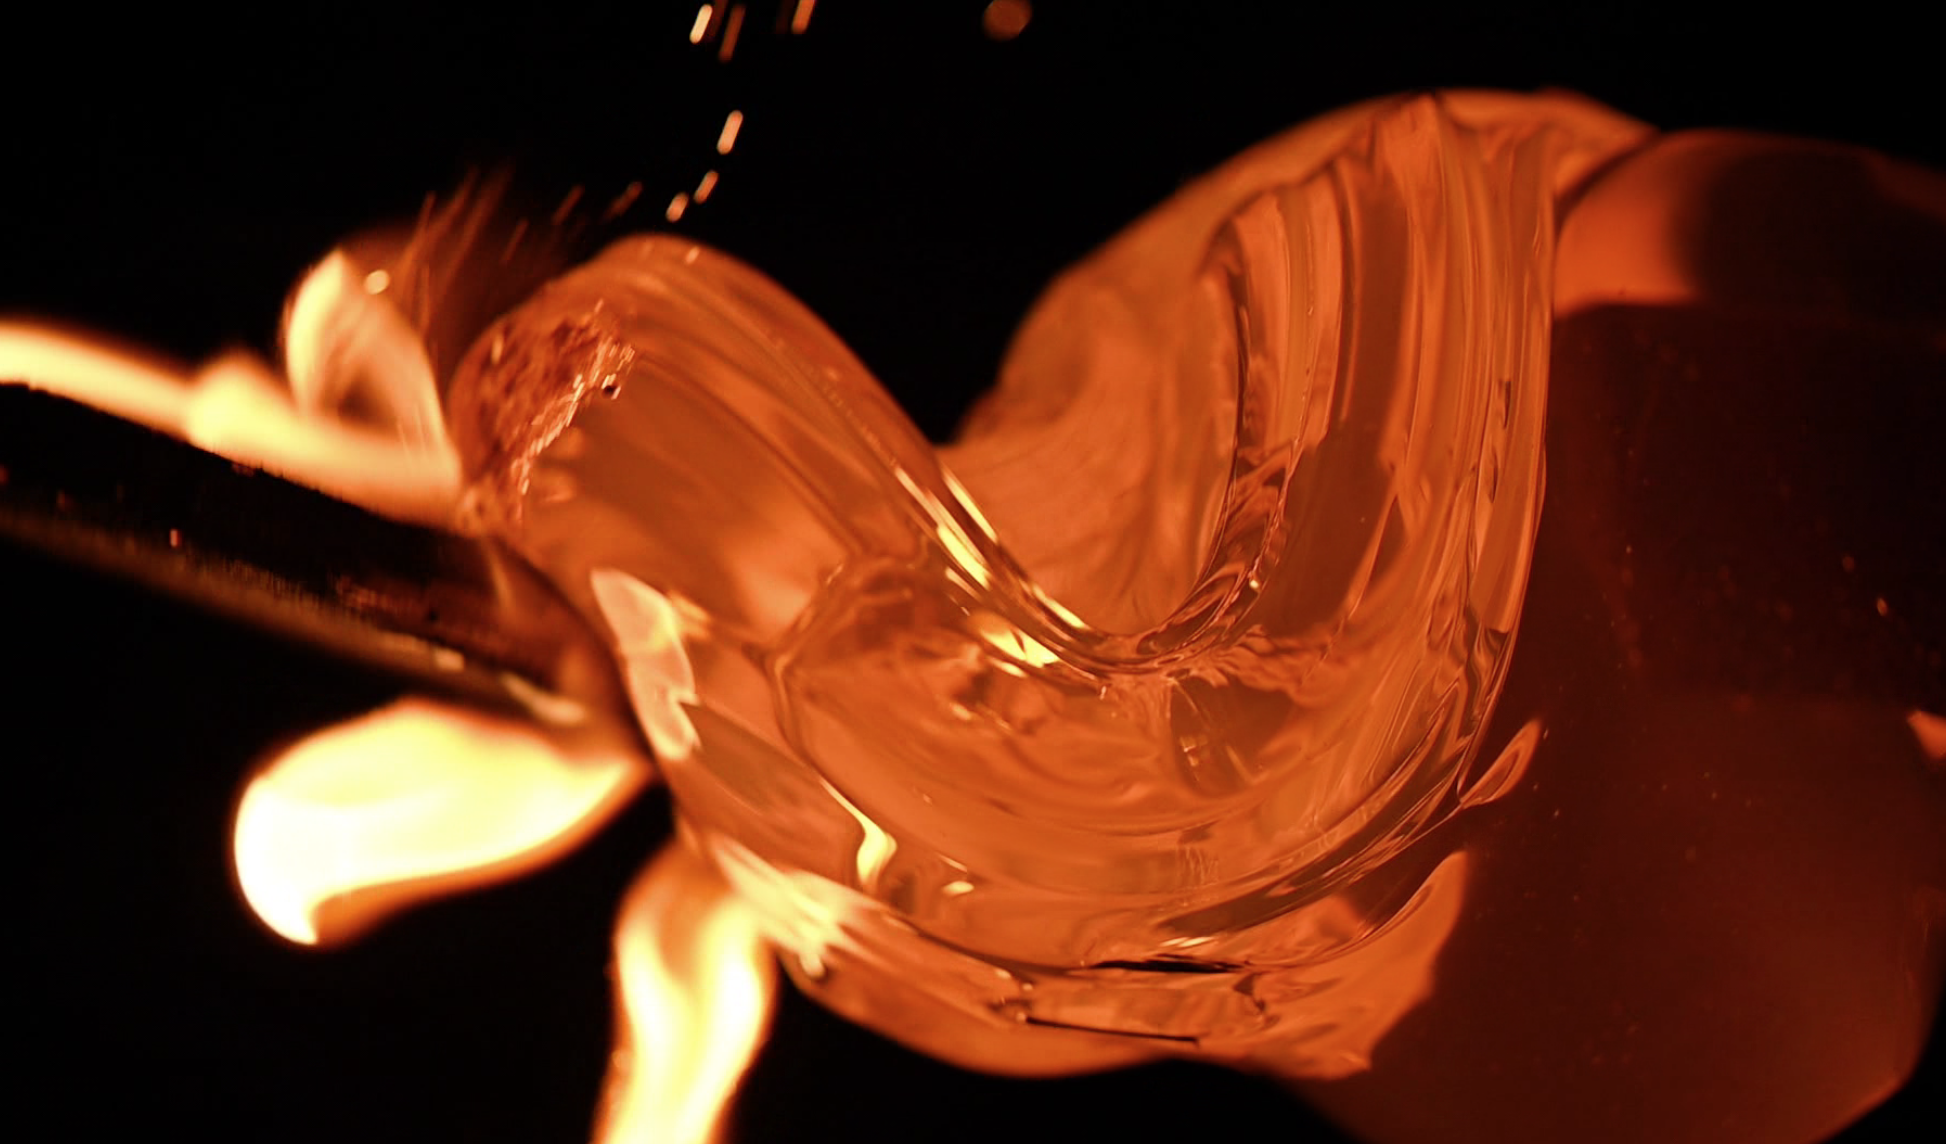 Ecstasy is a slow-motion video of molten glass. In the scene, the background is dark while the glass is illuminating the surrounding with heat. The molten glass on the end of a rod is turning slowly. The speed of the turning is not fast enough to keep the glass from falling. A wooden paddle comes into the frame from the left, slapping and pushing the glass from dropping. When the glass and wood meet, the heat burns the wood thus creating sparks. Sometimes the wooden pat stays longer on the glass, gently lifting the weight of the glass. As the two materials touch, the heat begins to light up the wooden paddle, creating a bigger flame than the sparks. The video is accompanied by the background sound of white waves crashing on shores.